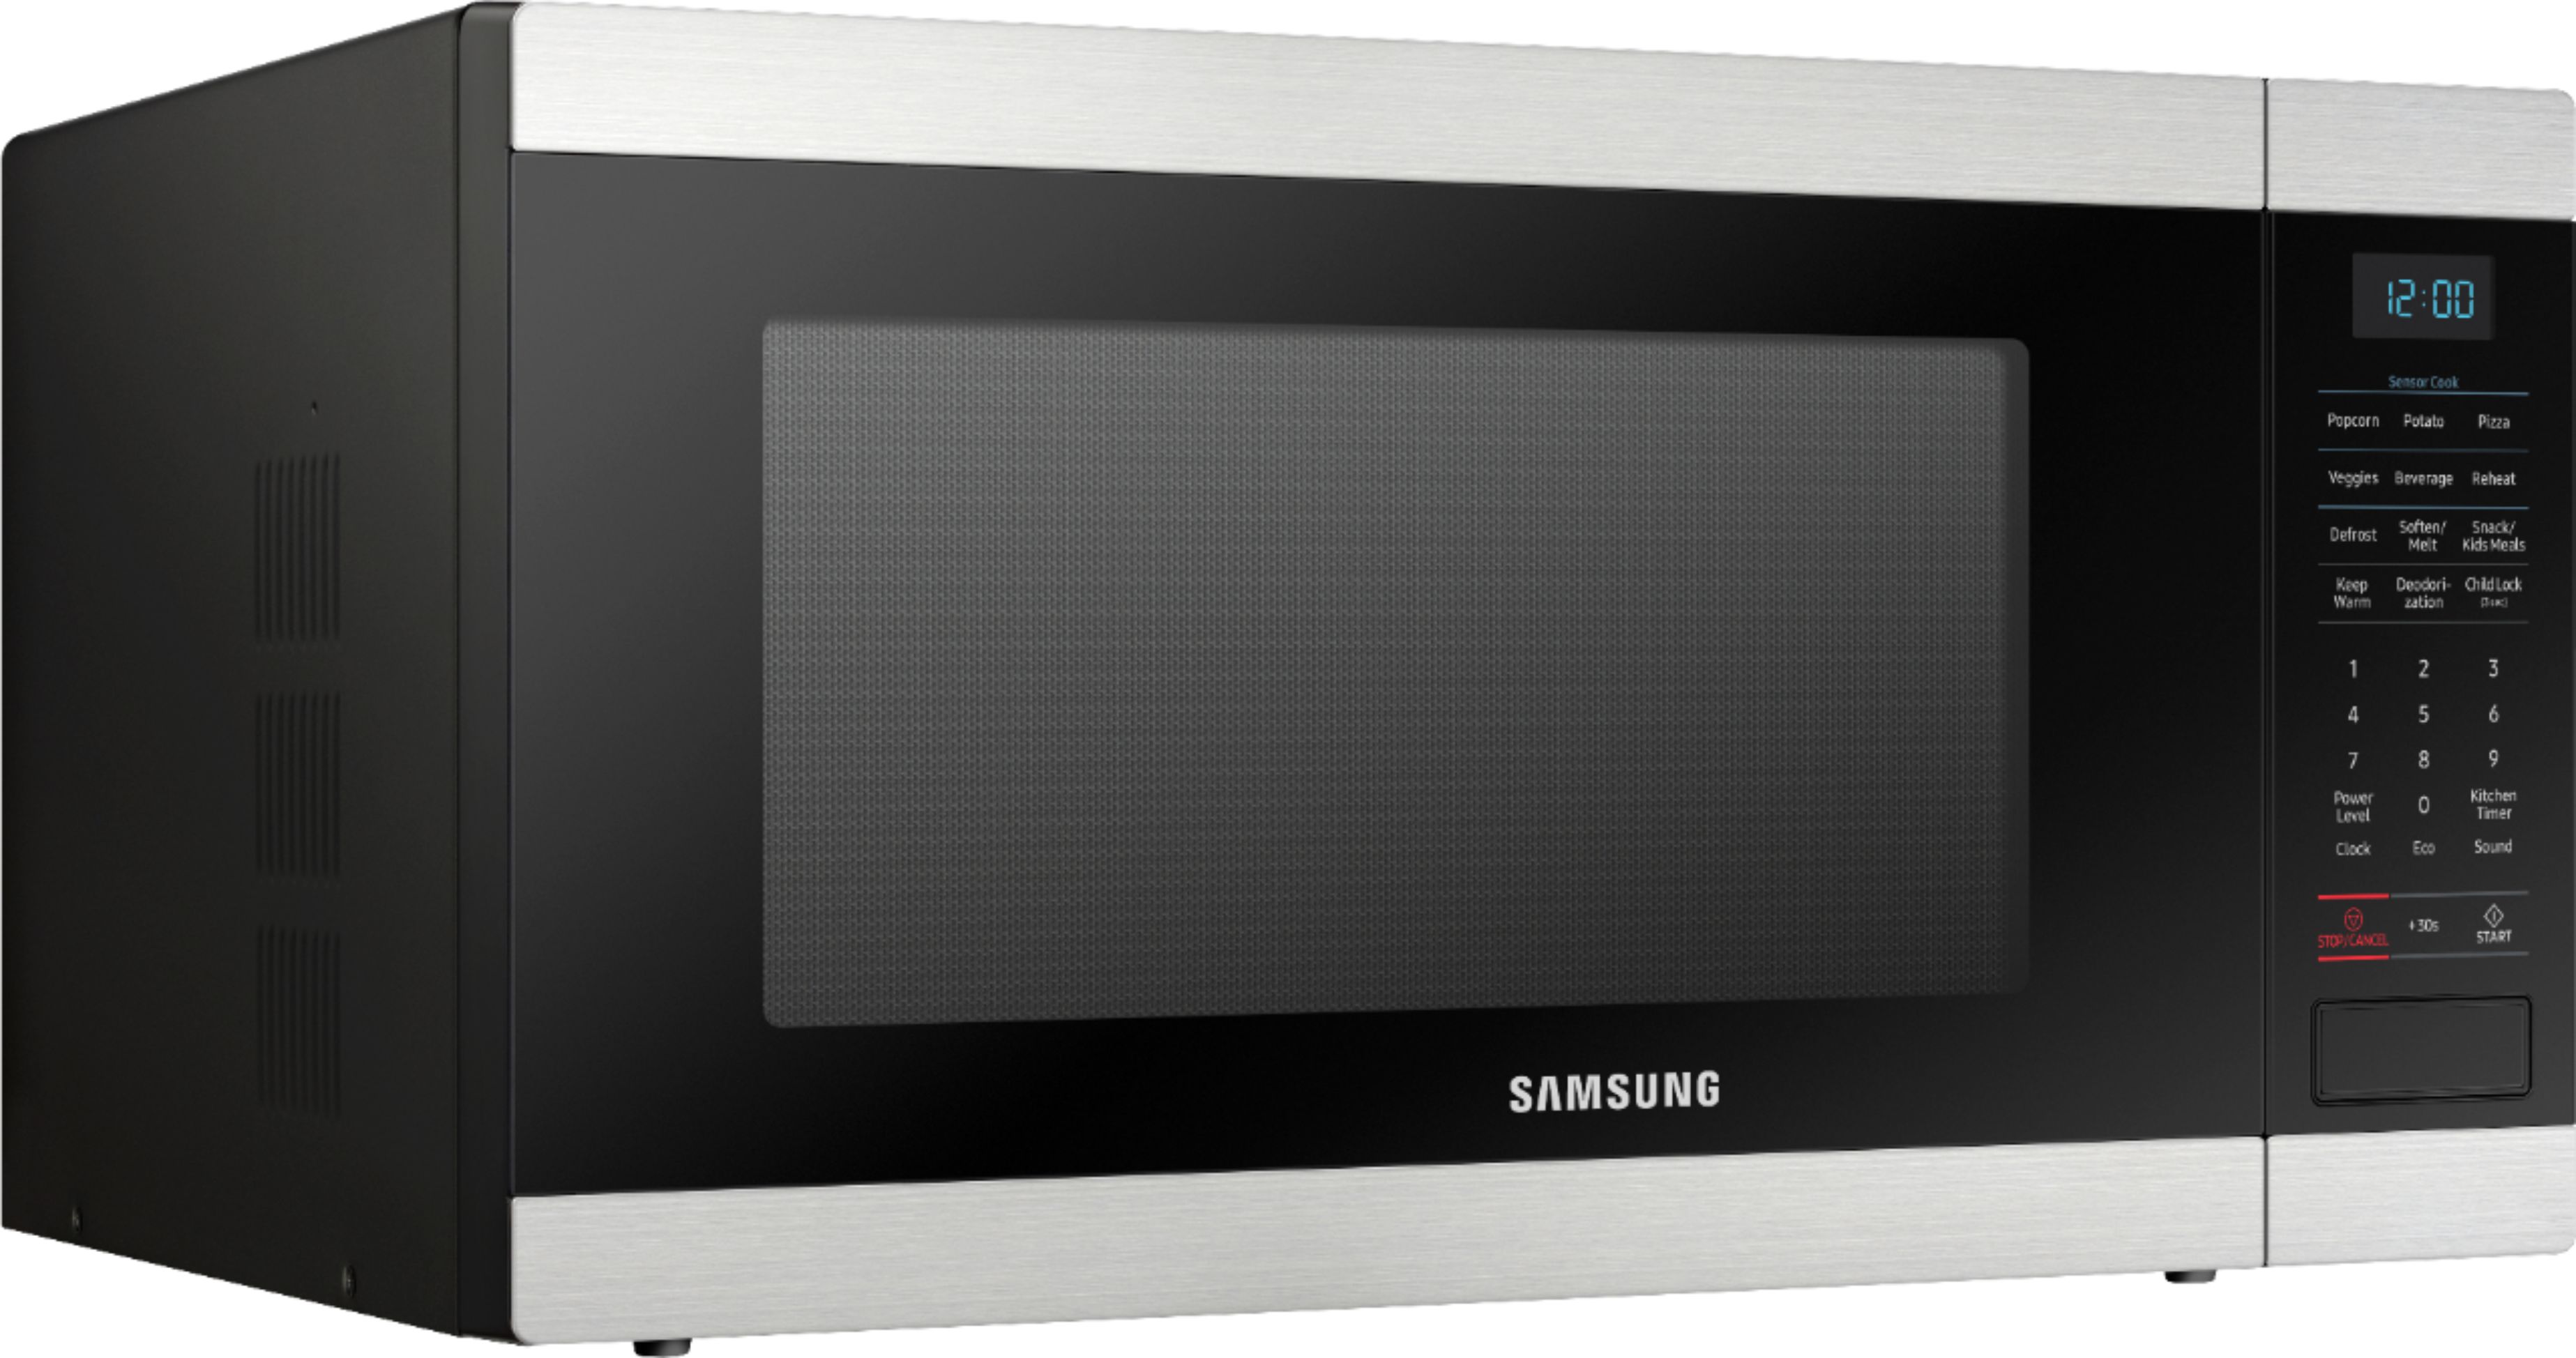 Angle View: Samsung - 1.9 Cu. Ft. Countertop Microwave with Sensor Cook - Stainless steel